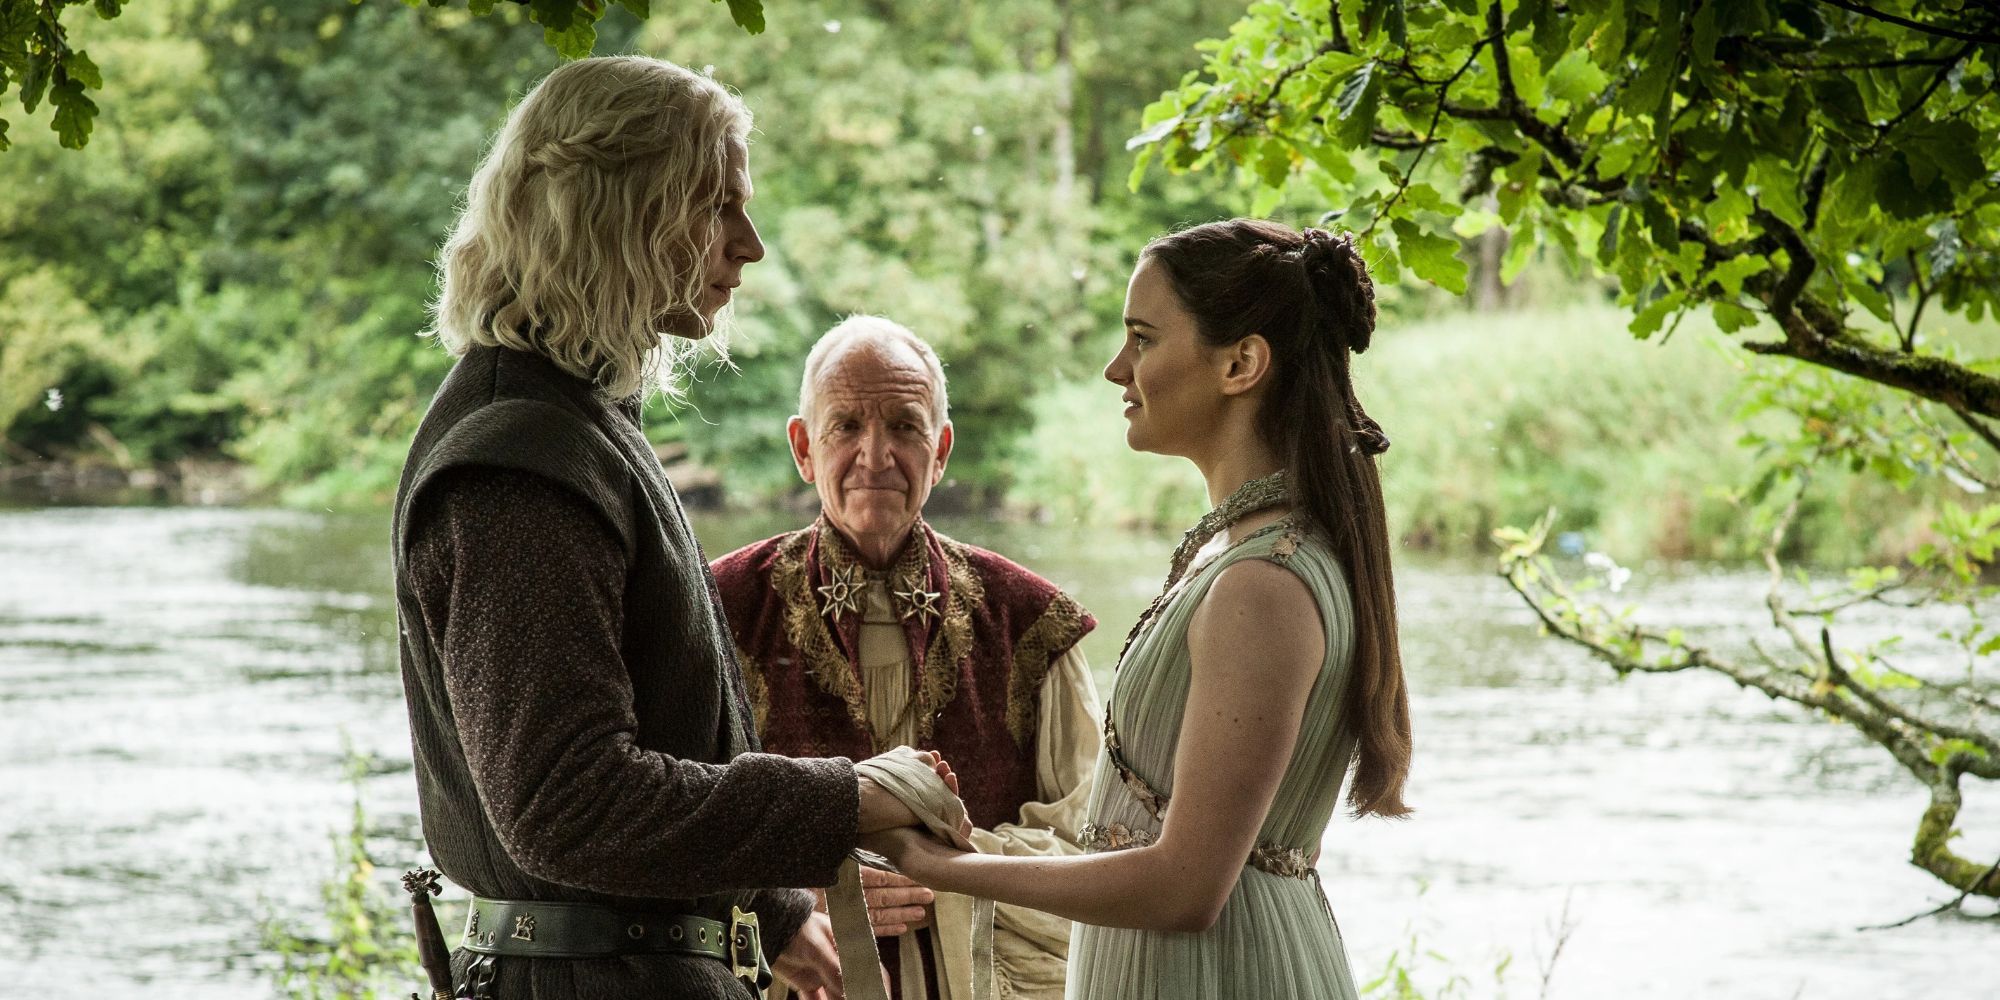 Rhaegar (Wilf Scolding) and Lyanna (Aisling Franciosi) hold hands as they get married in 'Game of Thrones'